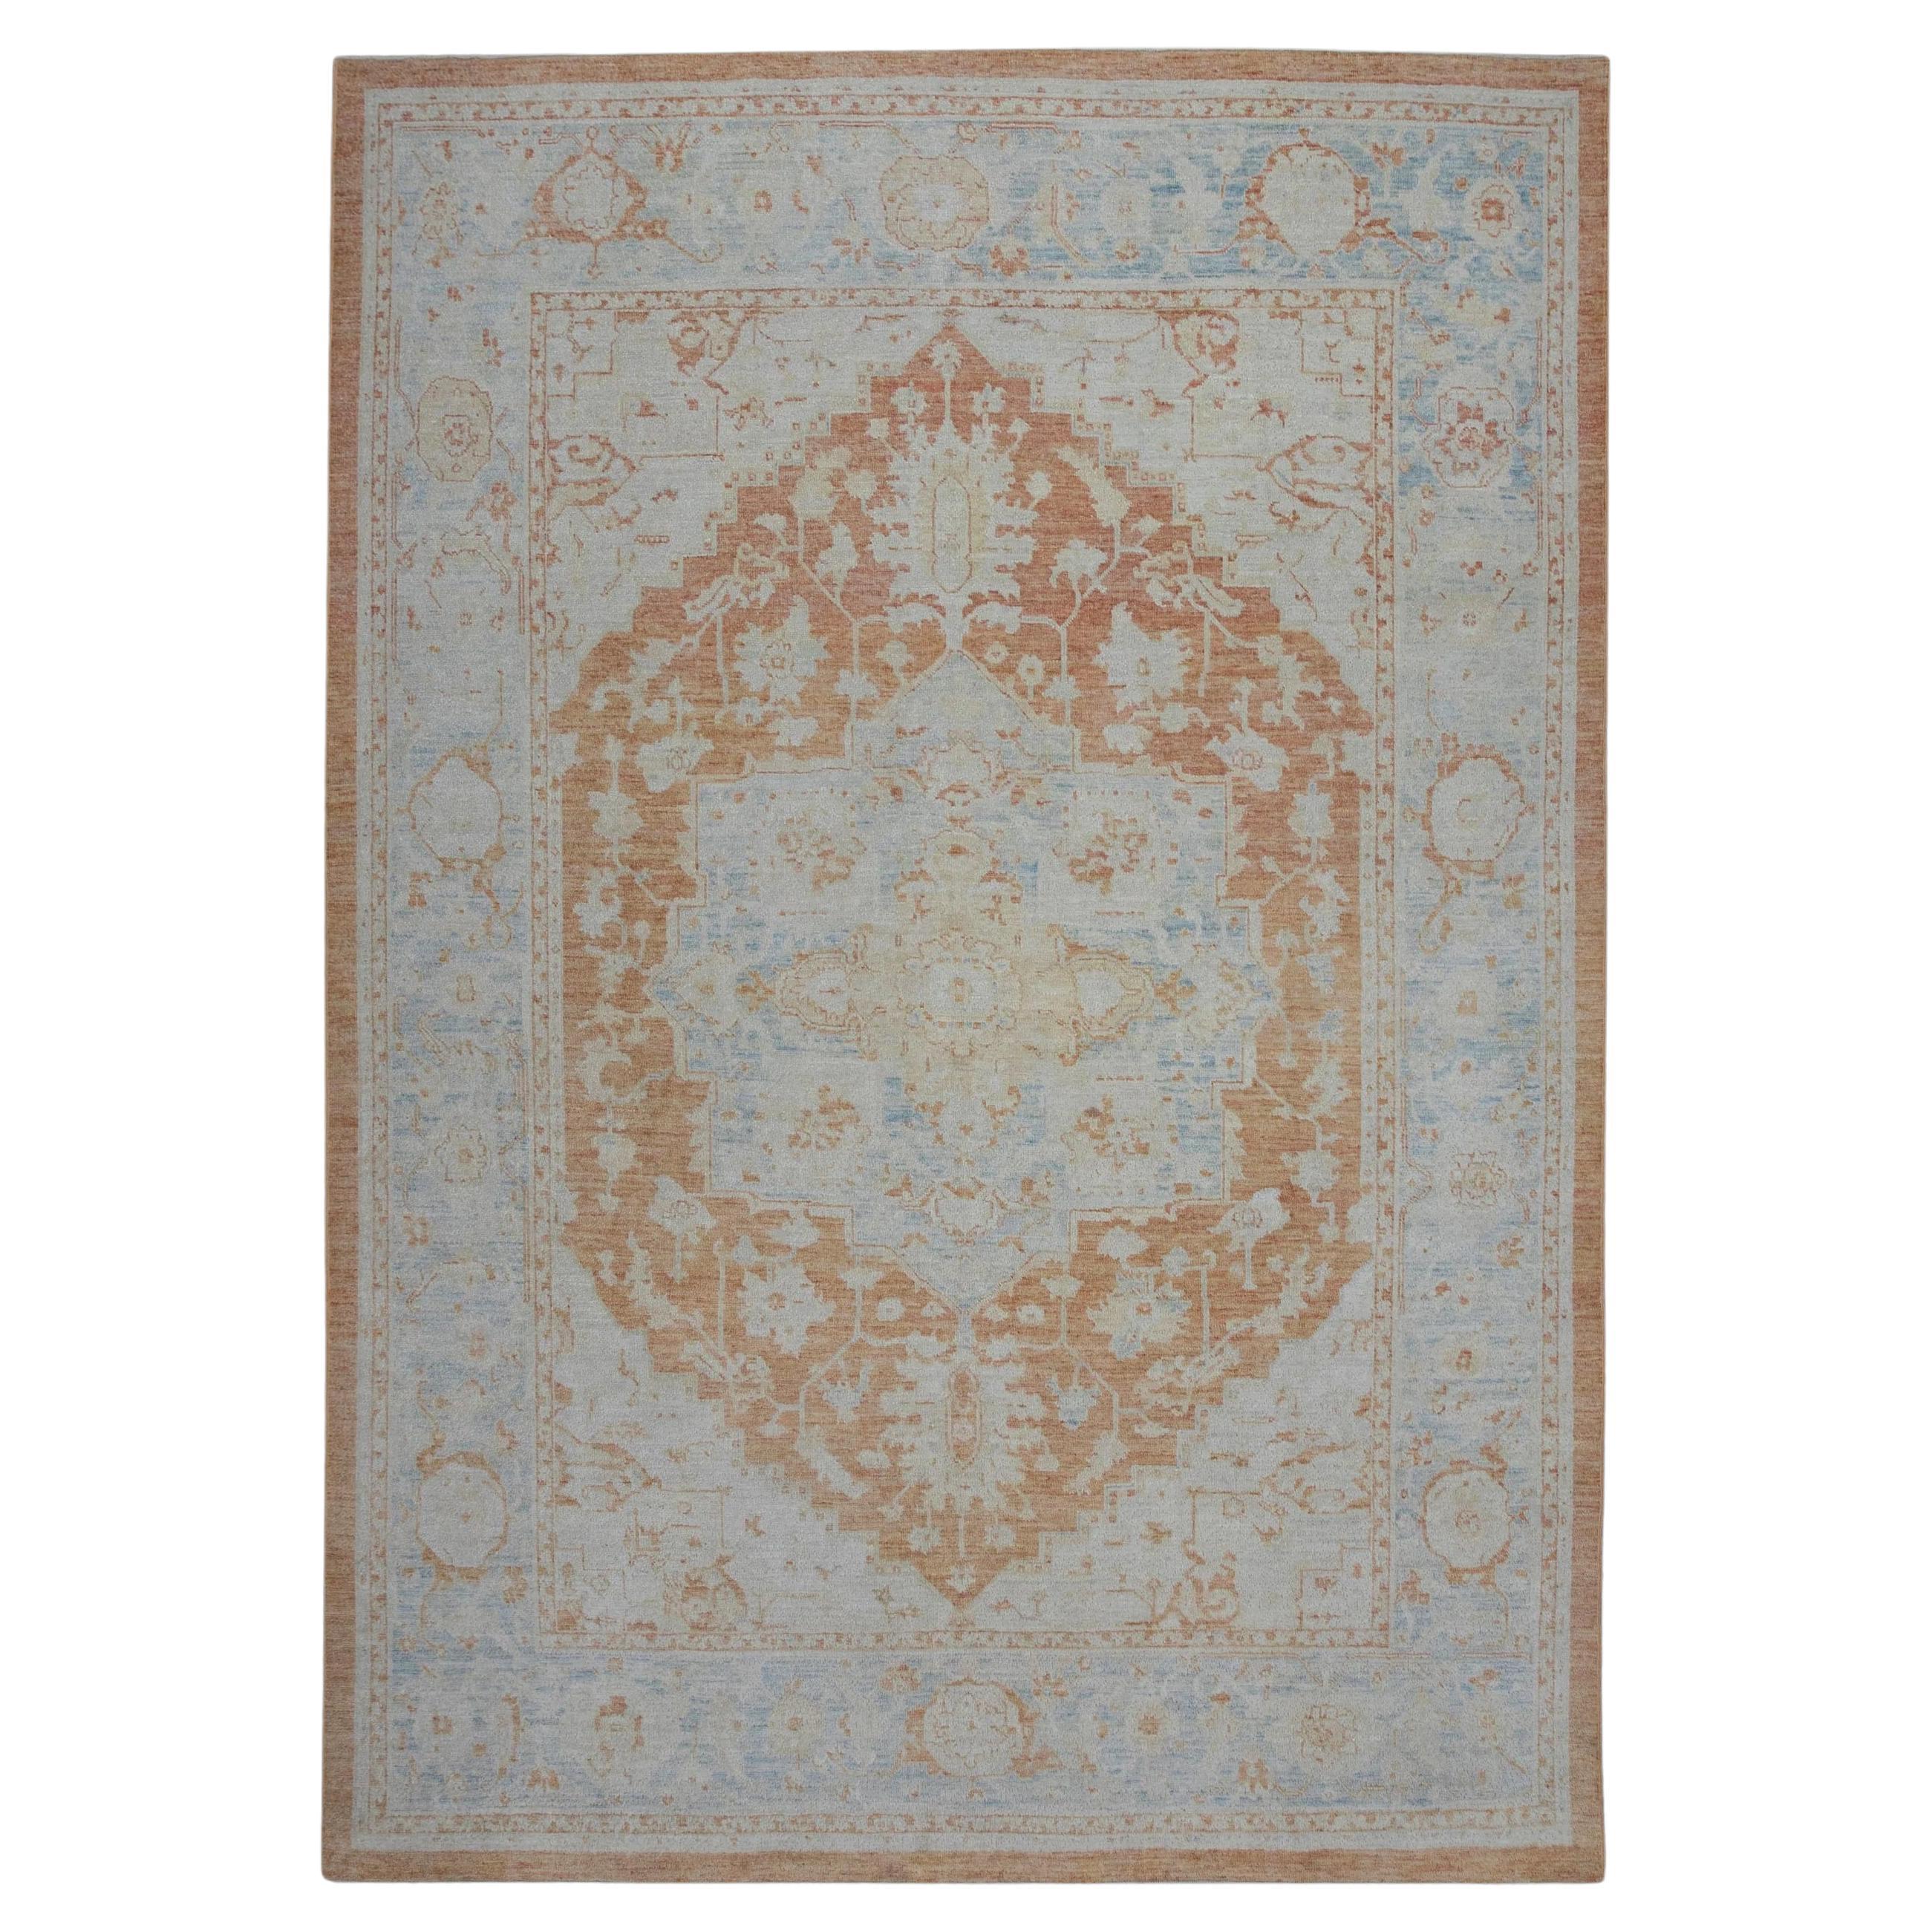 Floral Turkish Finewoven Wool Oushak Rug in Baby Blue and Salmon 7'9" x 10'6" For Sale